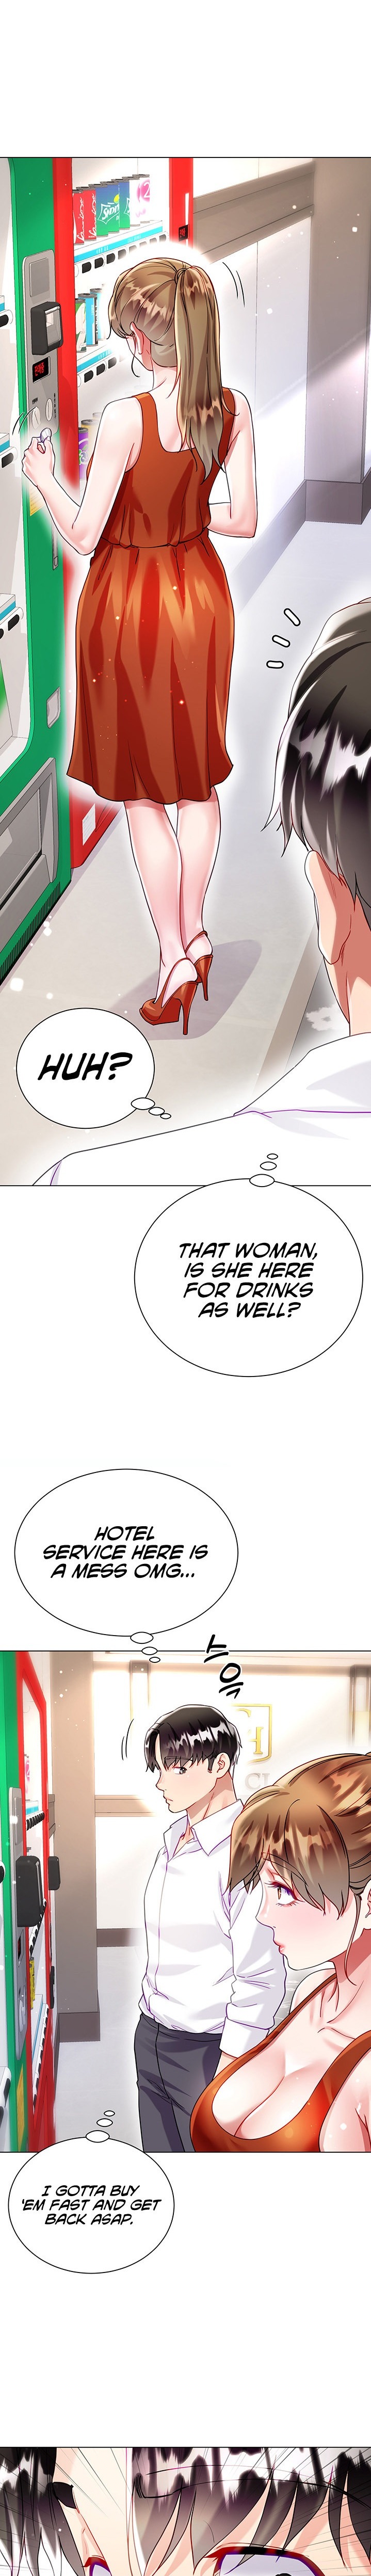 My Sister-in-law’s Skirt - Chapter 27 Page 2